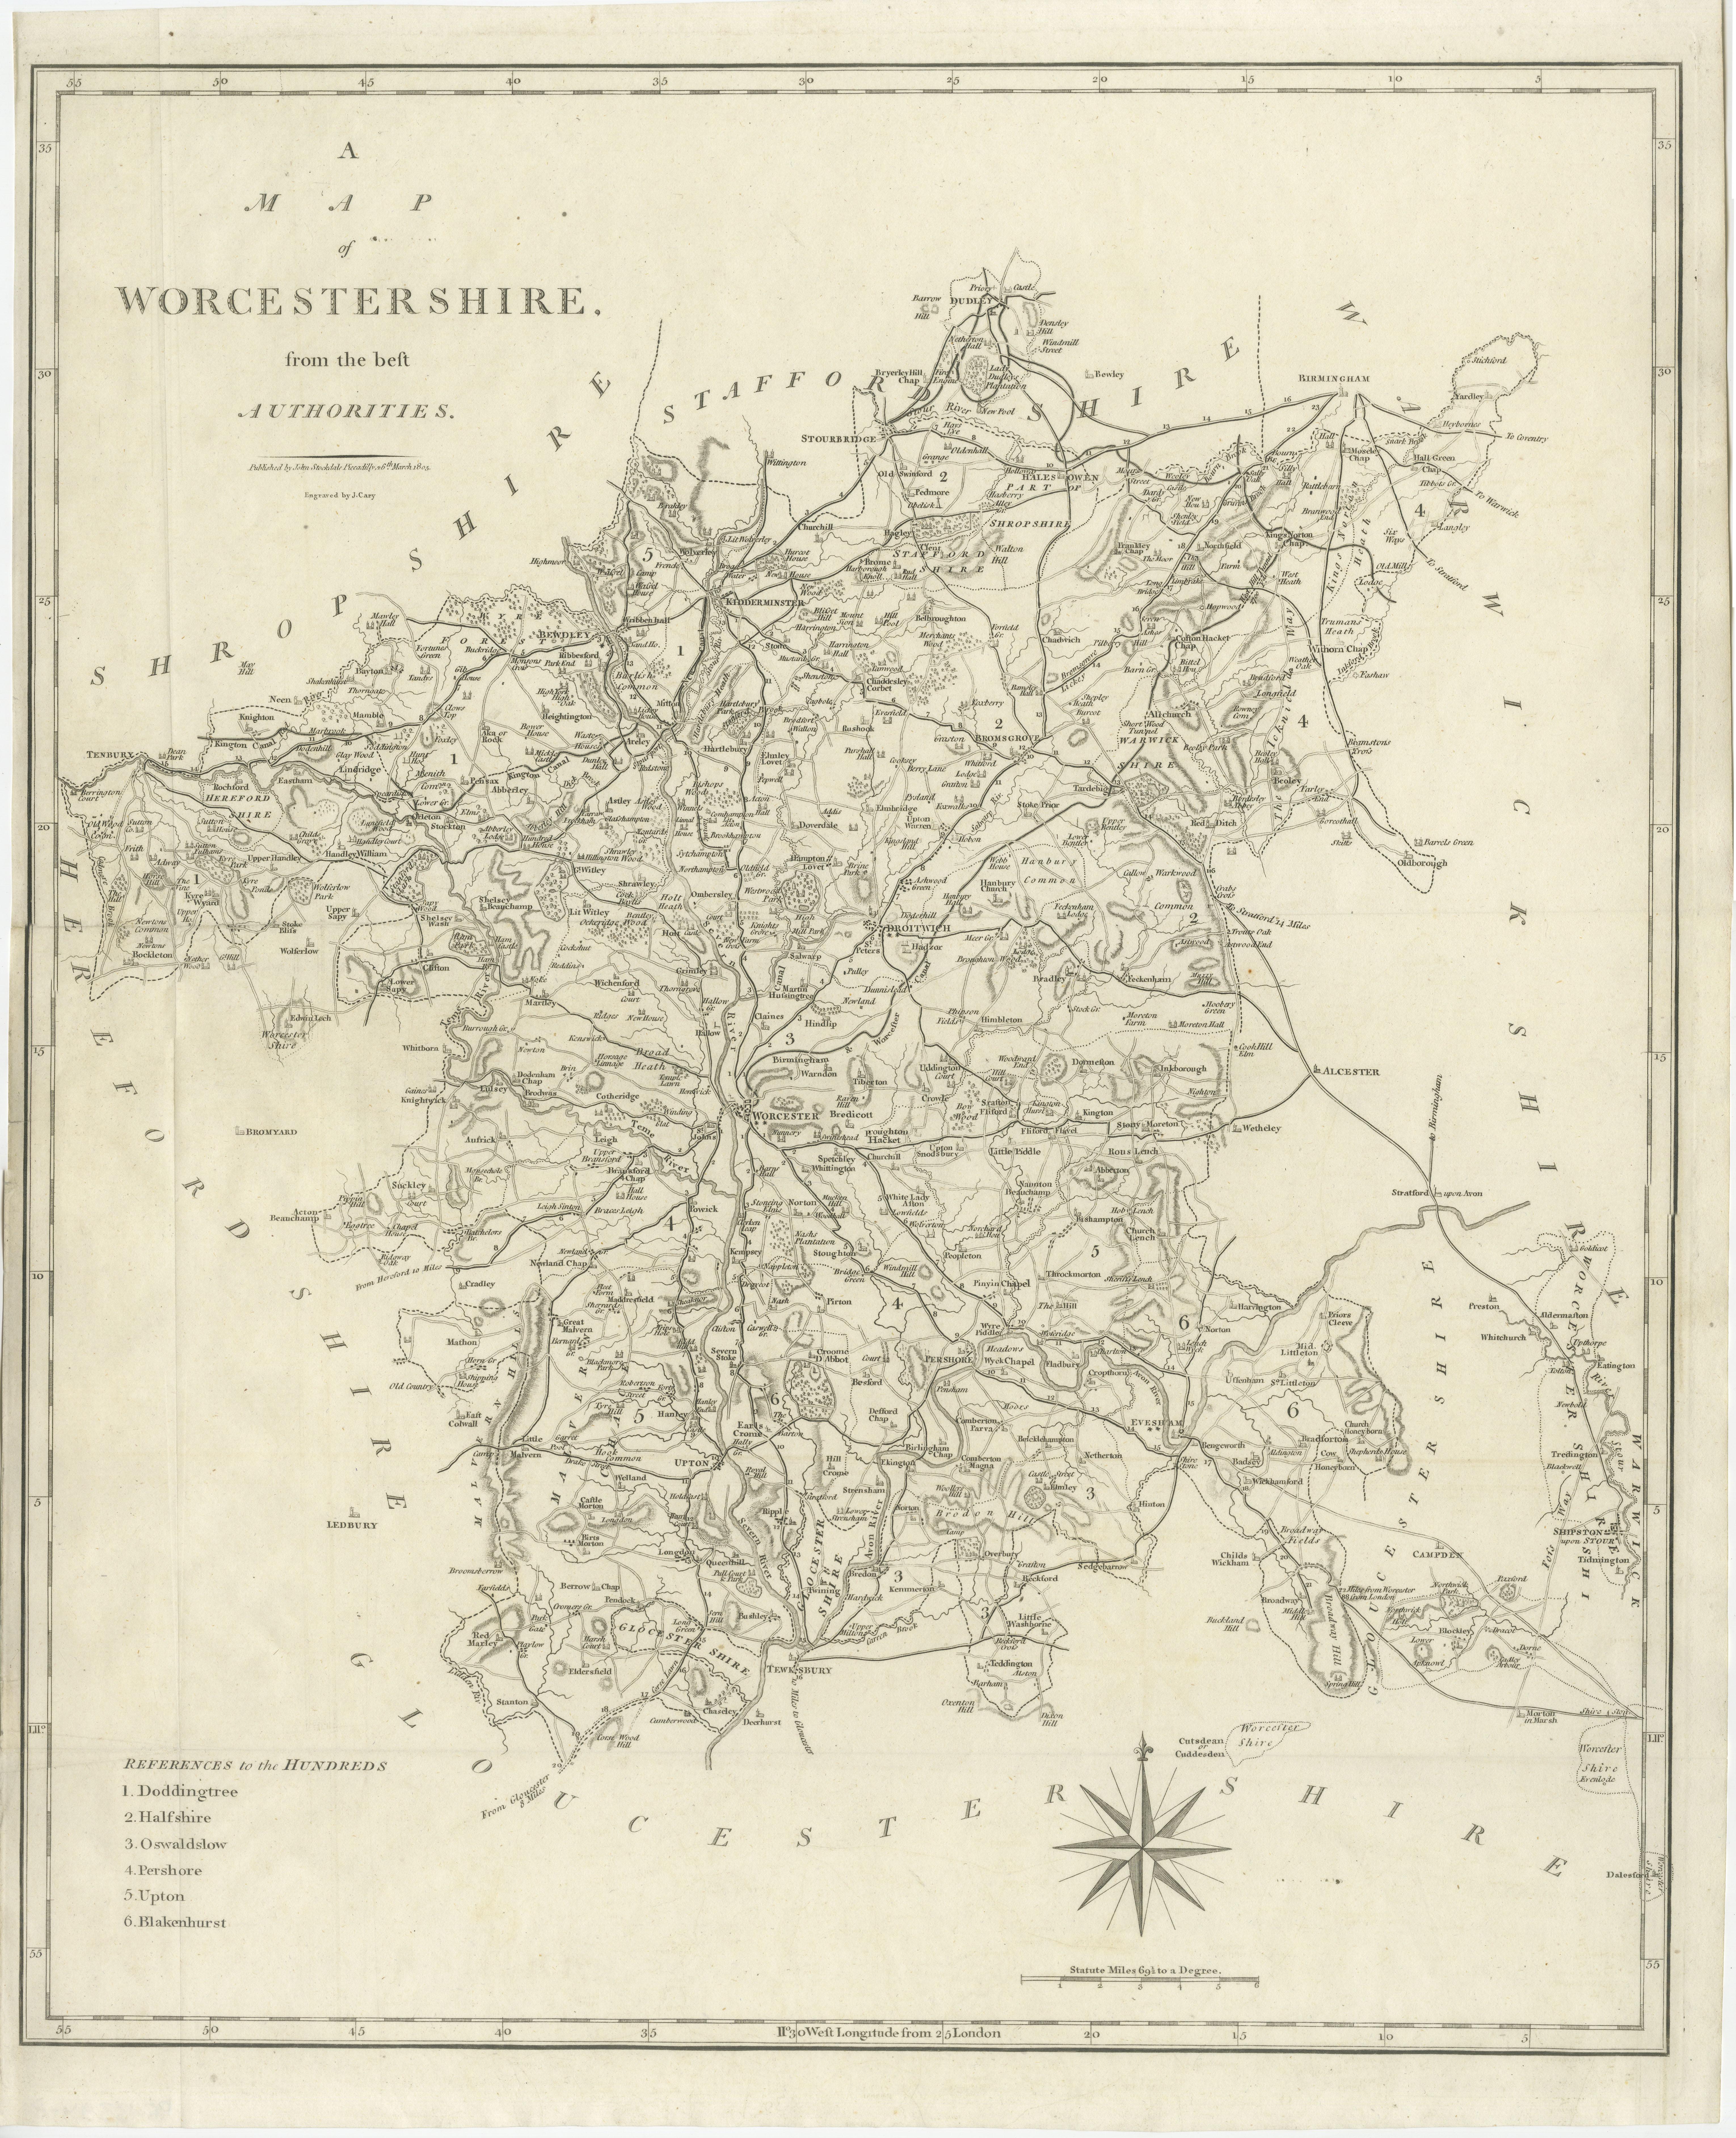 Antique map titled 'A Map of Worcestershire from the best Authorities'. Original old county map of Worcestershire, England. Engraved by John Cary. Originates from 'New British Atlas' by John Stockdale, published 1805. 

John Cary (1755-1835) was a